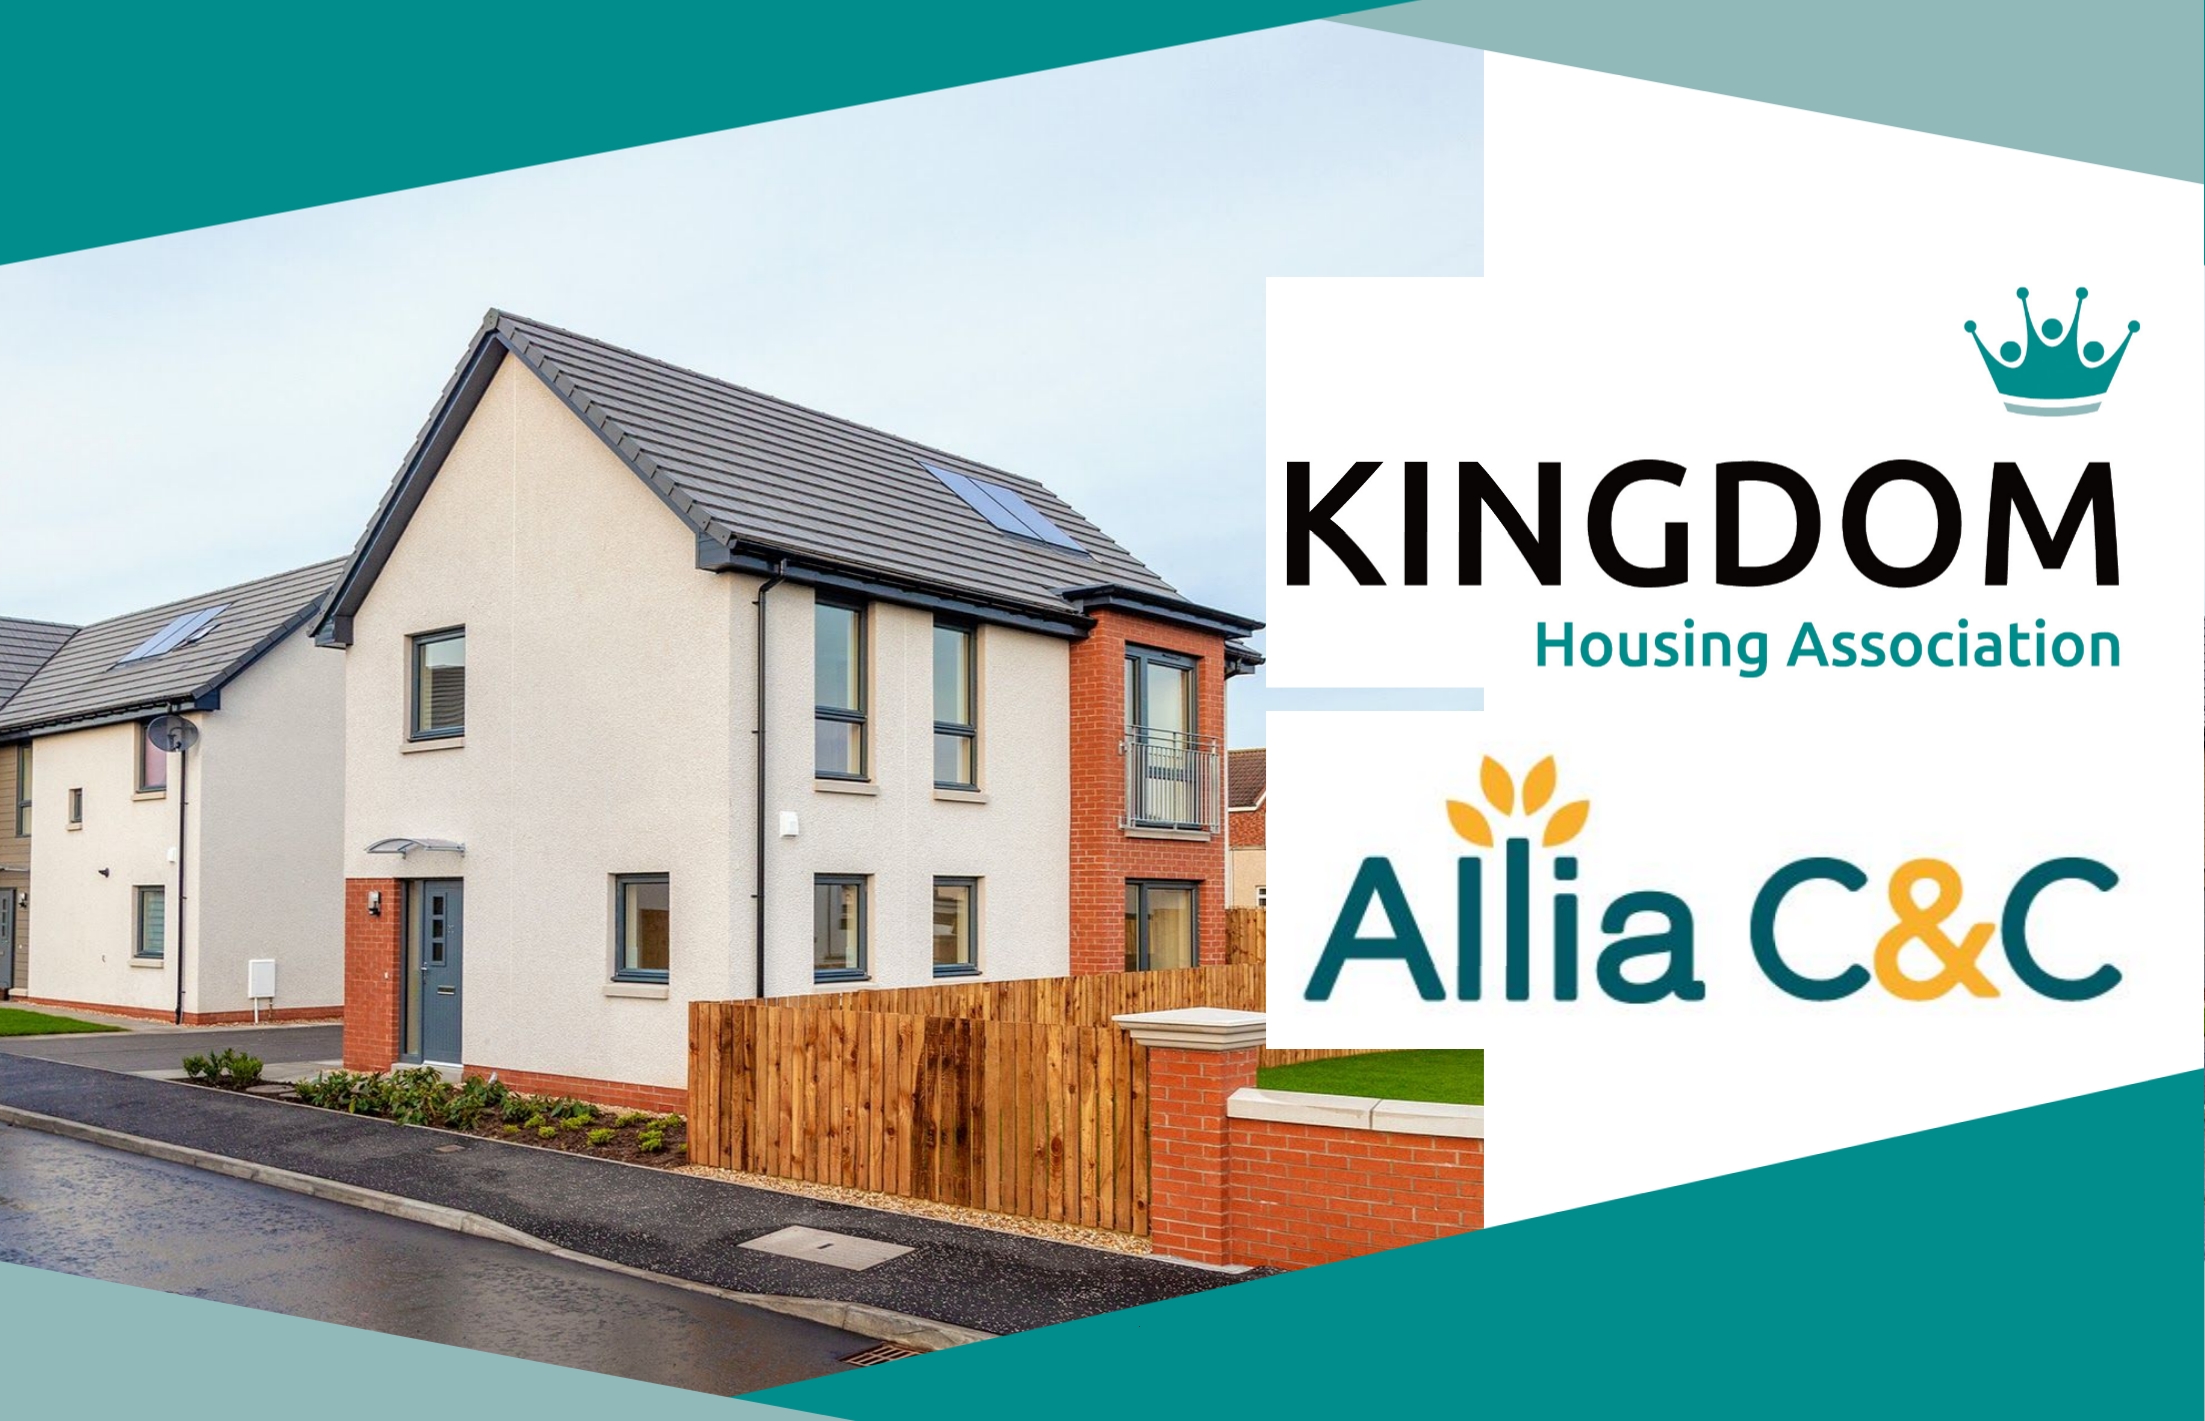 Kingdom to continue development programme with £25m private placement